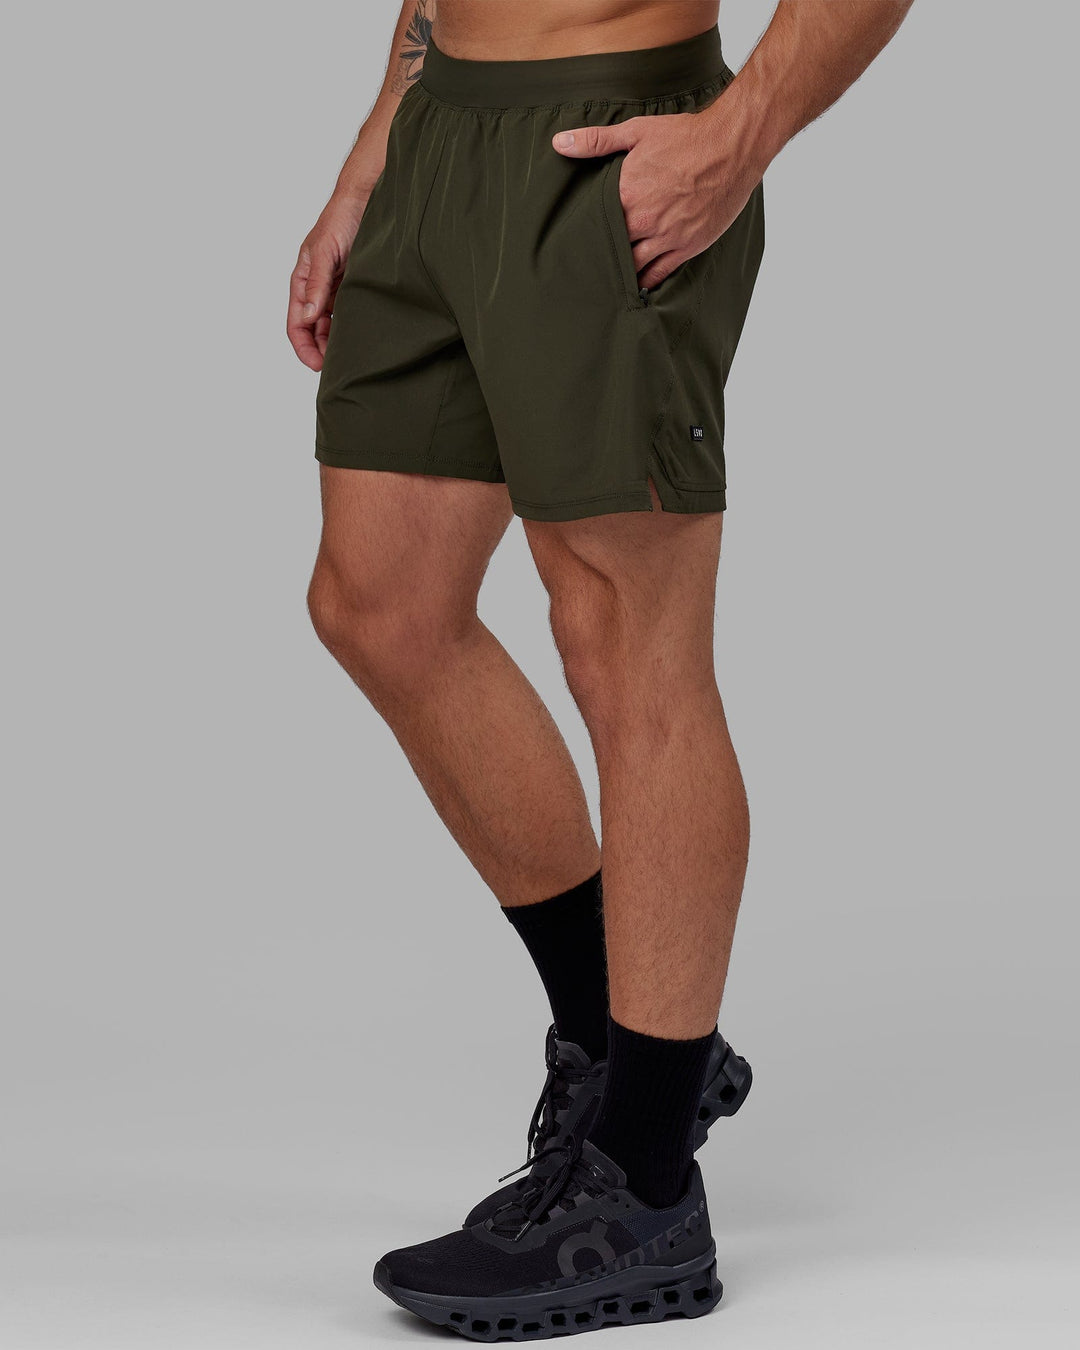 Man wearing Challenger 6" Performance Short with Liner - Forest Night